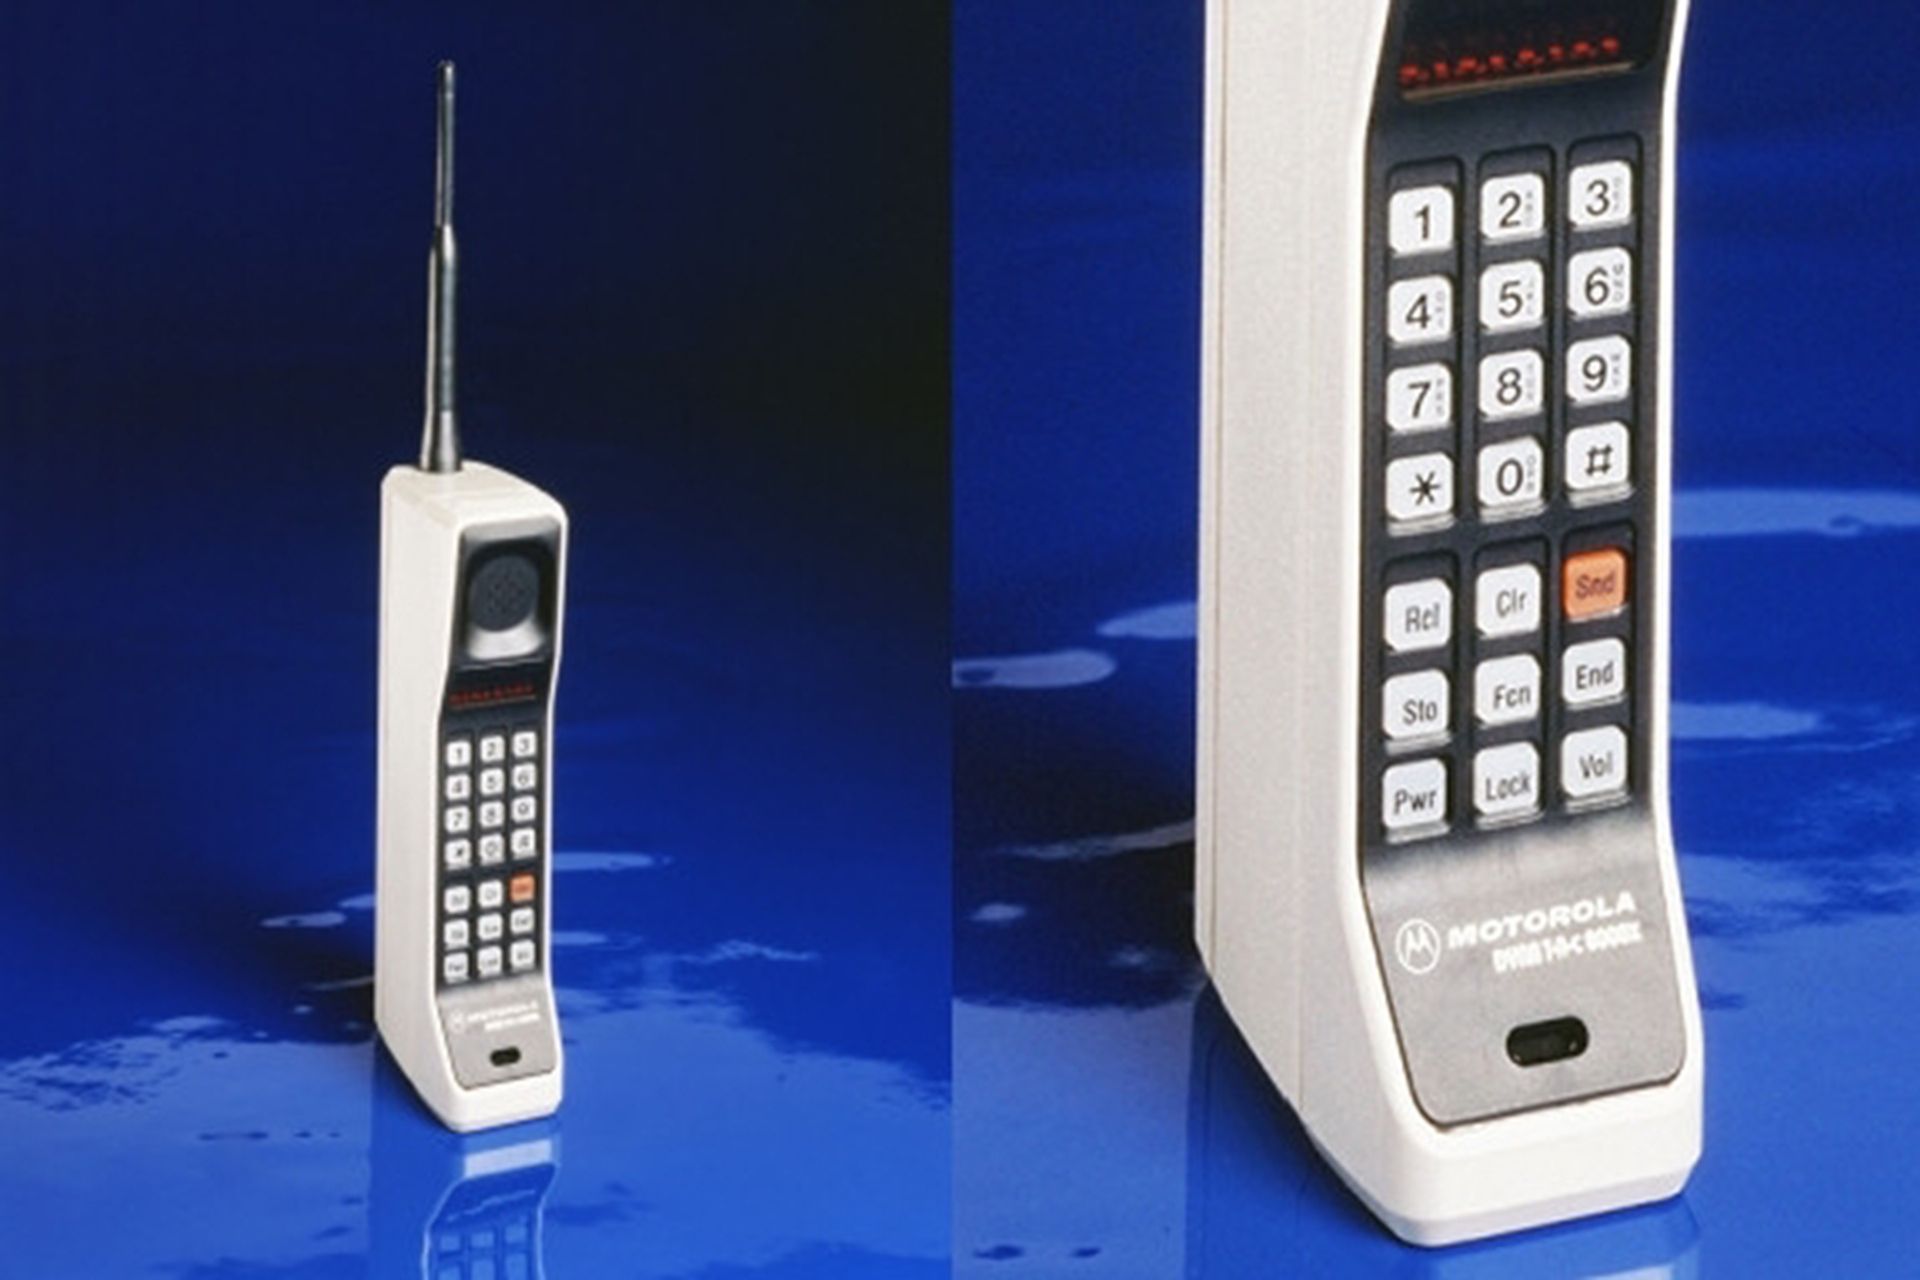 A DynaTAC 8000X - the first commercially available mobile phone from 1983. PHOTO: COURTESY OF MOTOROLA